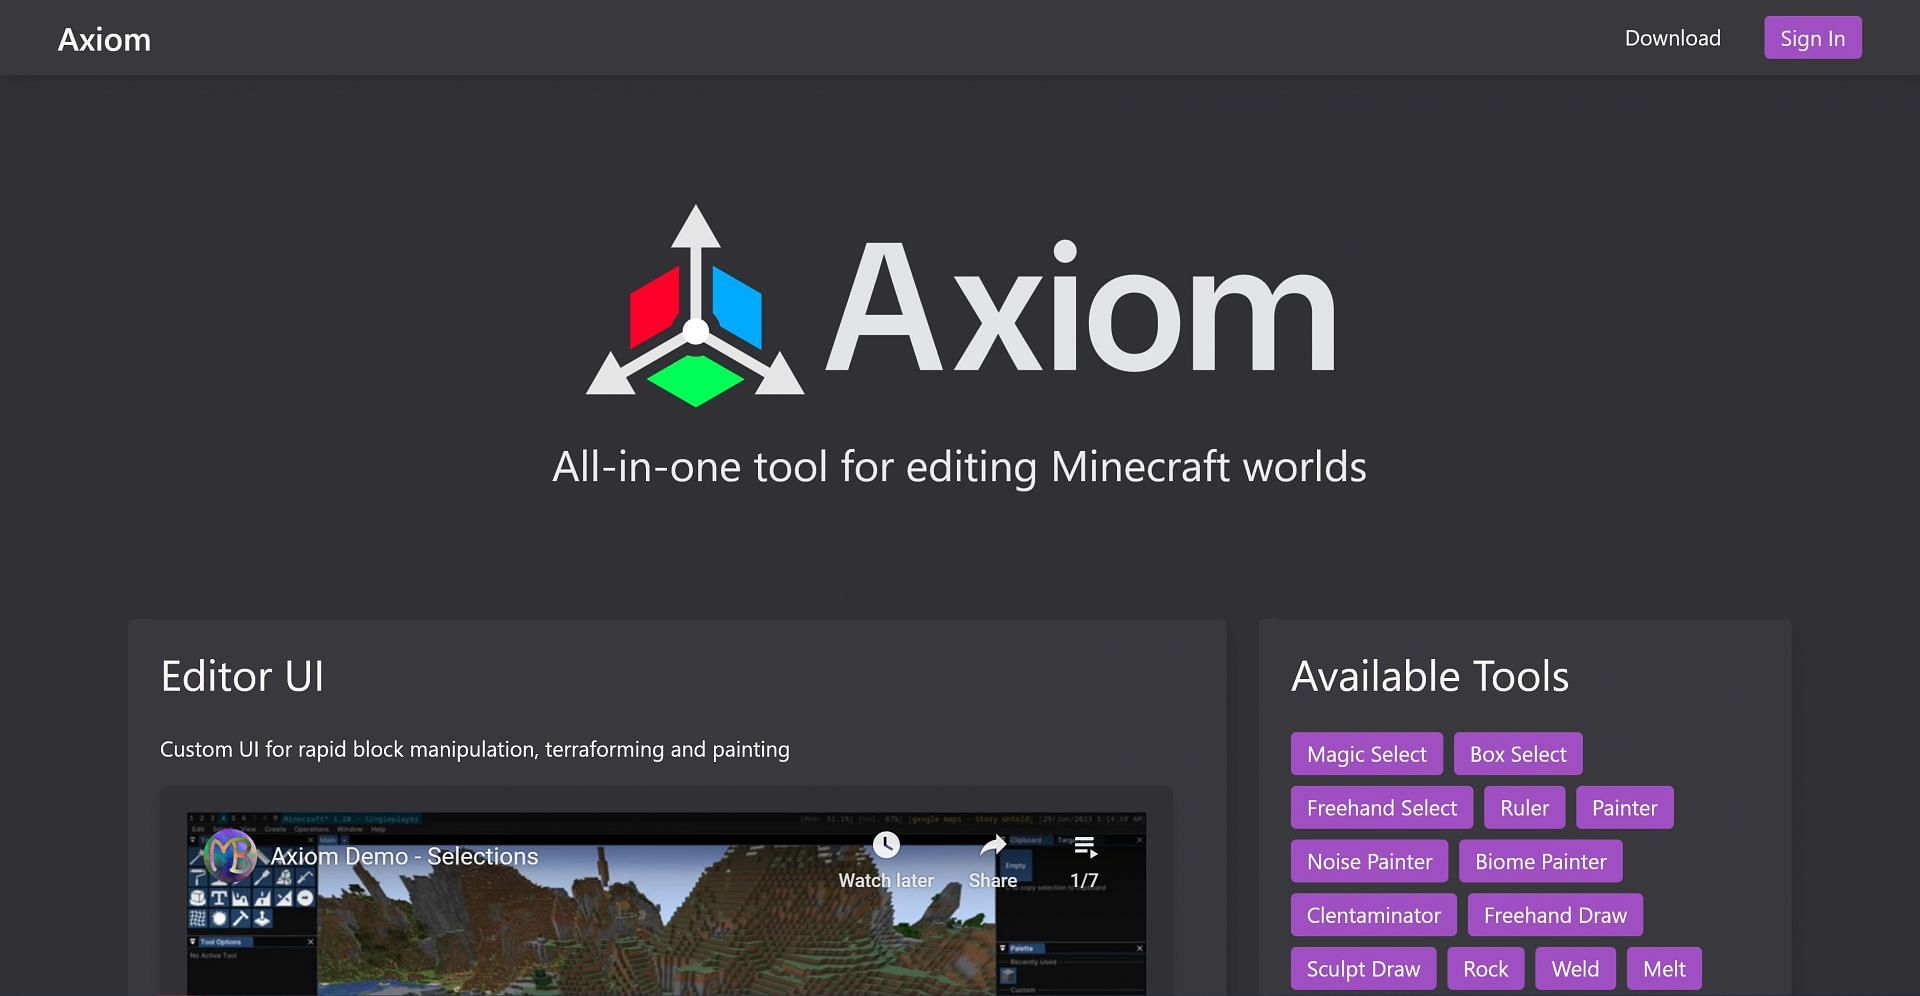 The Axiom website&#039;s homepage and download button (Image via Axiom)